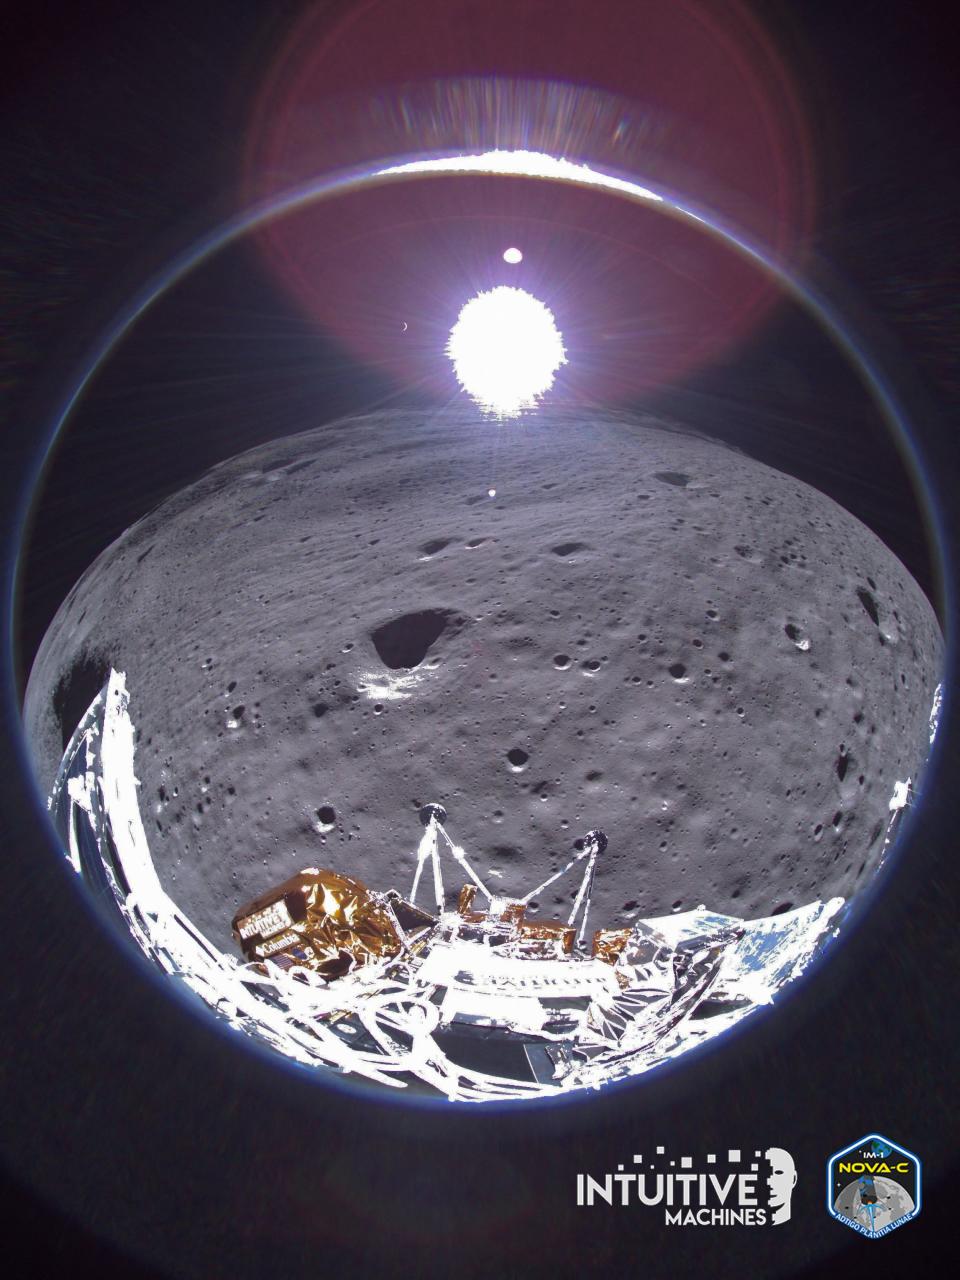 Intuitive Machines' Odysseus lunar lander's sends out its farewell transmission, which was Feb. 22 and received Thursday, a week later, before its power was depleted. The image shows the crescent Earth in the background viewed from the lunar surface.